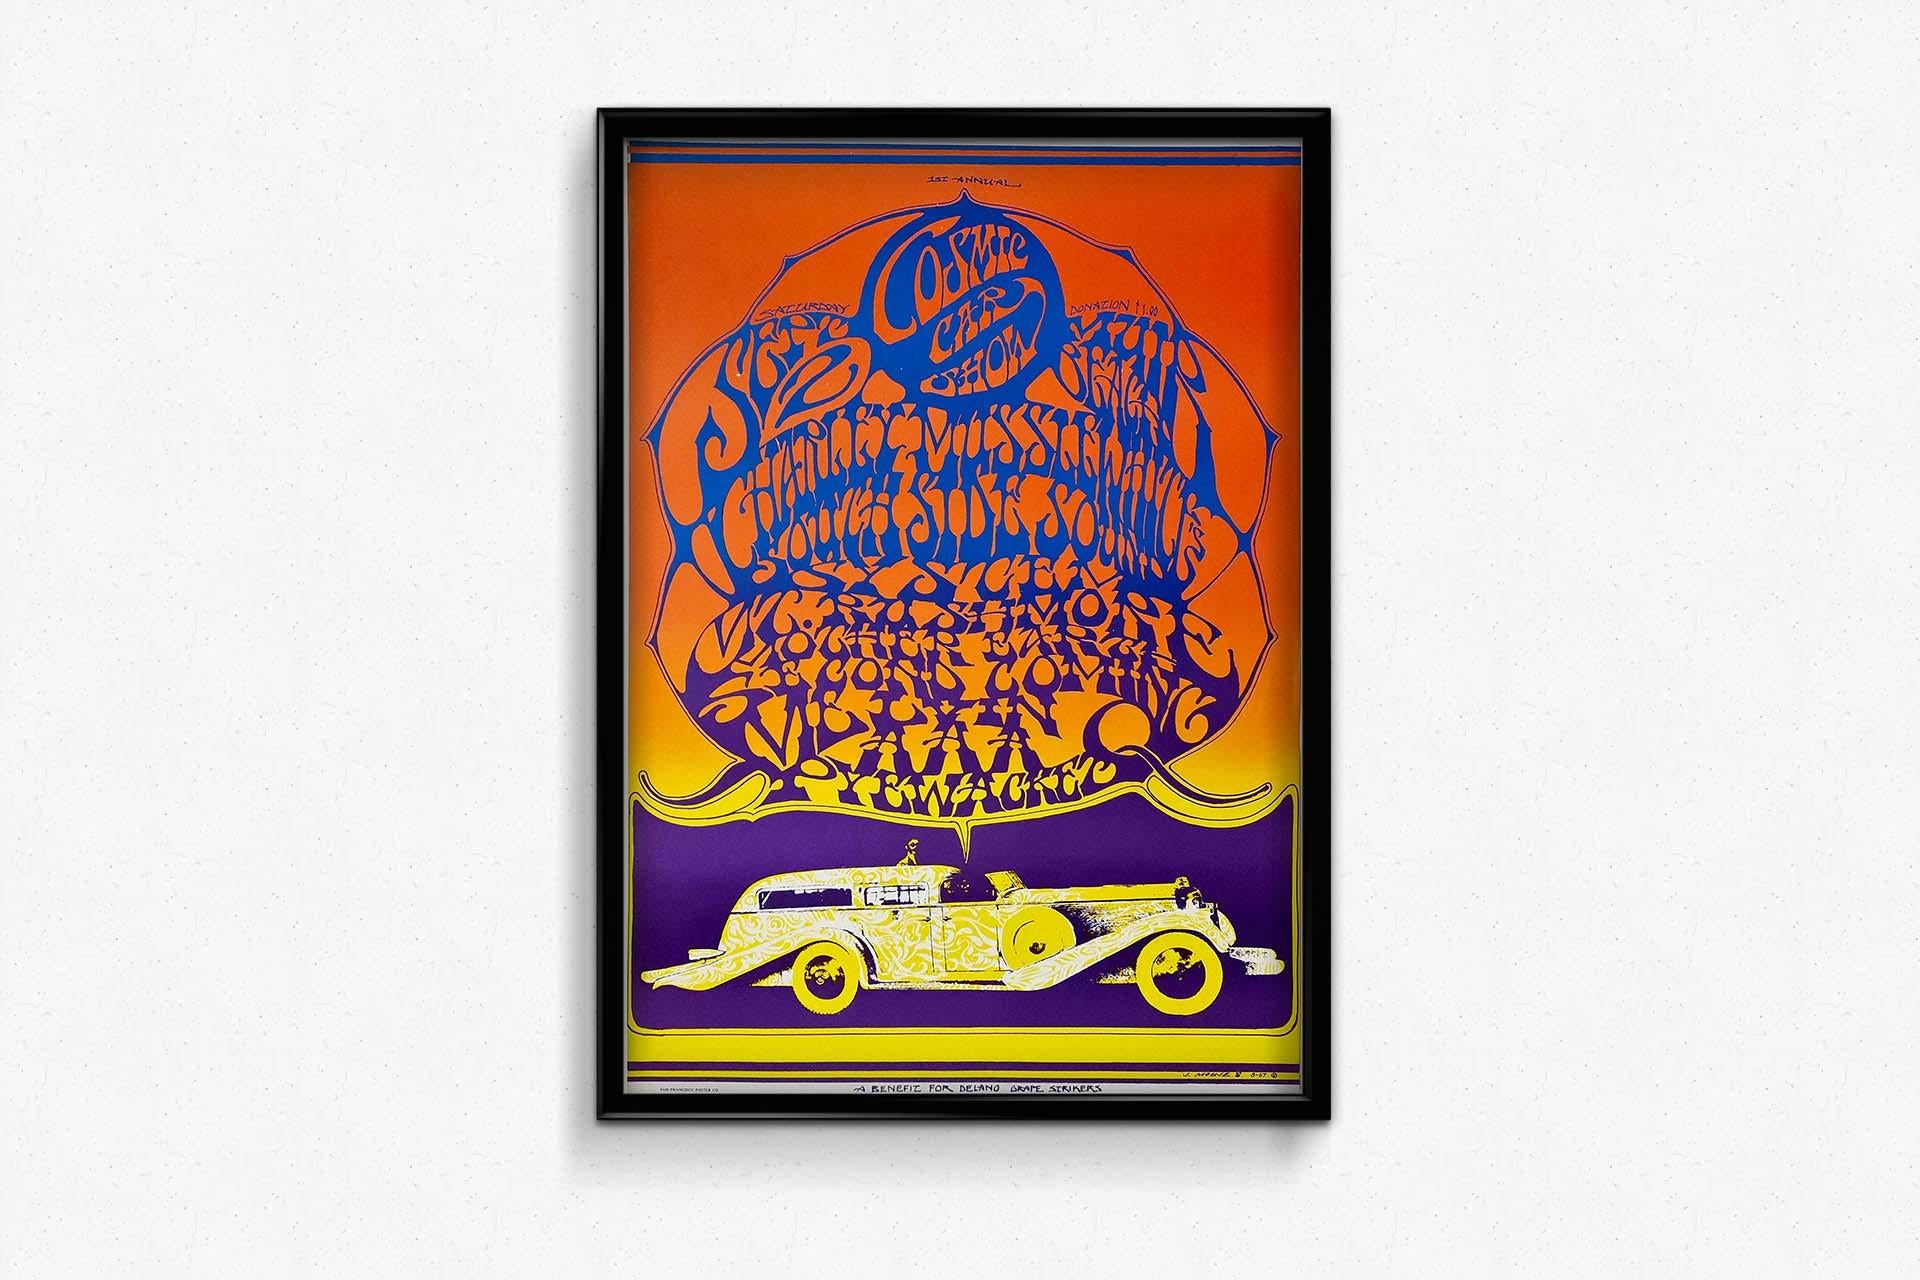 Screen printed poster designed by Stanley Mouse, depicting a classic car under a text bubble in a psychedelic font.

The text gives the details of the event: Saturday, September 2, $1 donation, Muir Beach.

The flyer also lists the bands that will